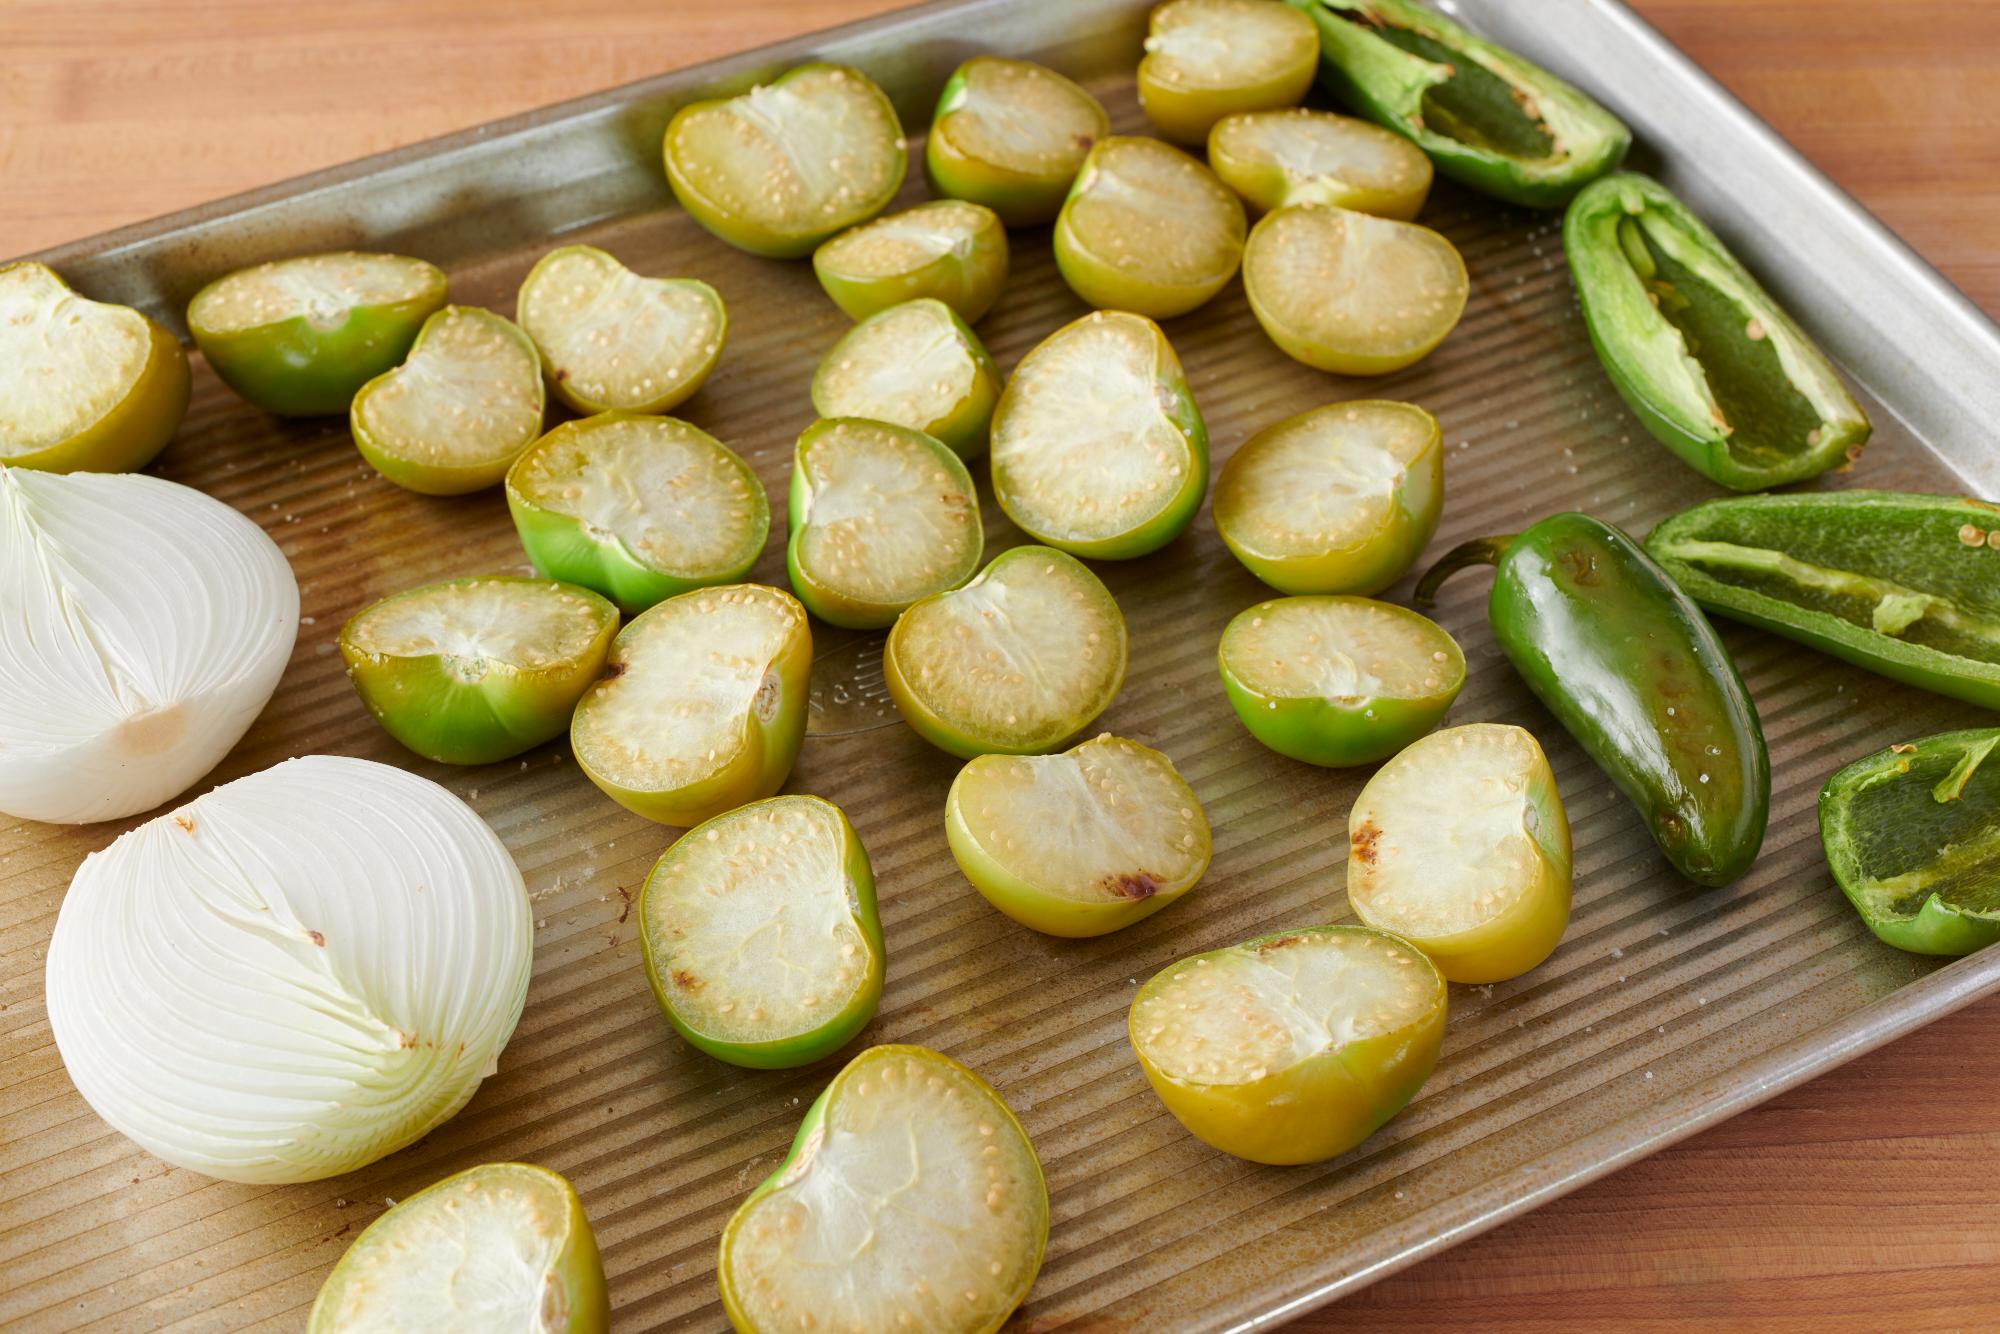 Roasting the tomatillos, onion and jalapenos.